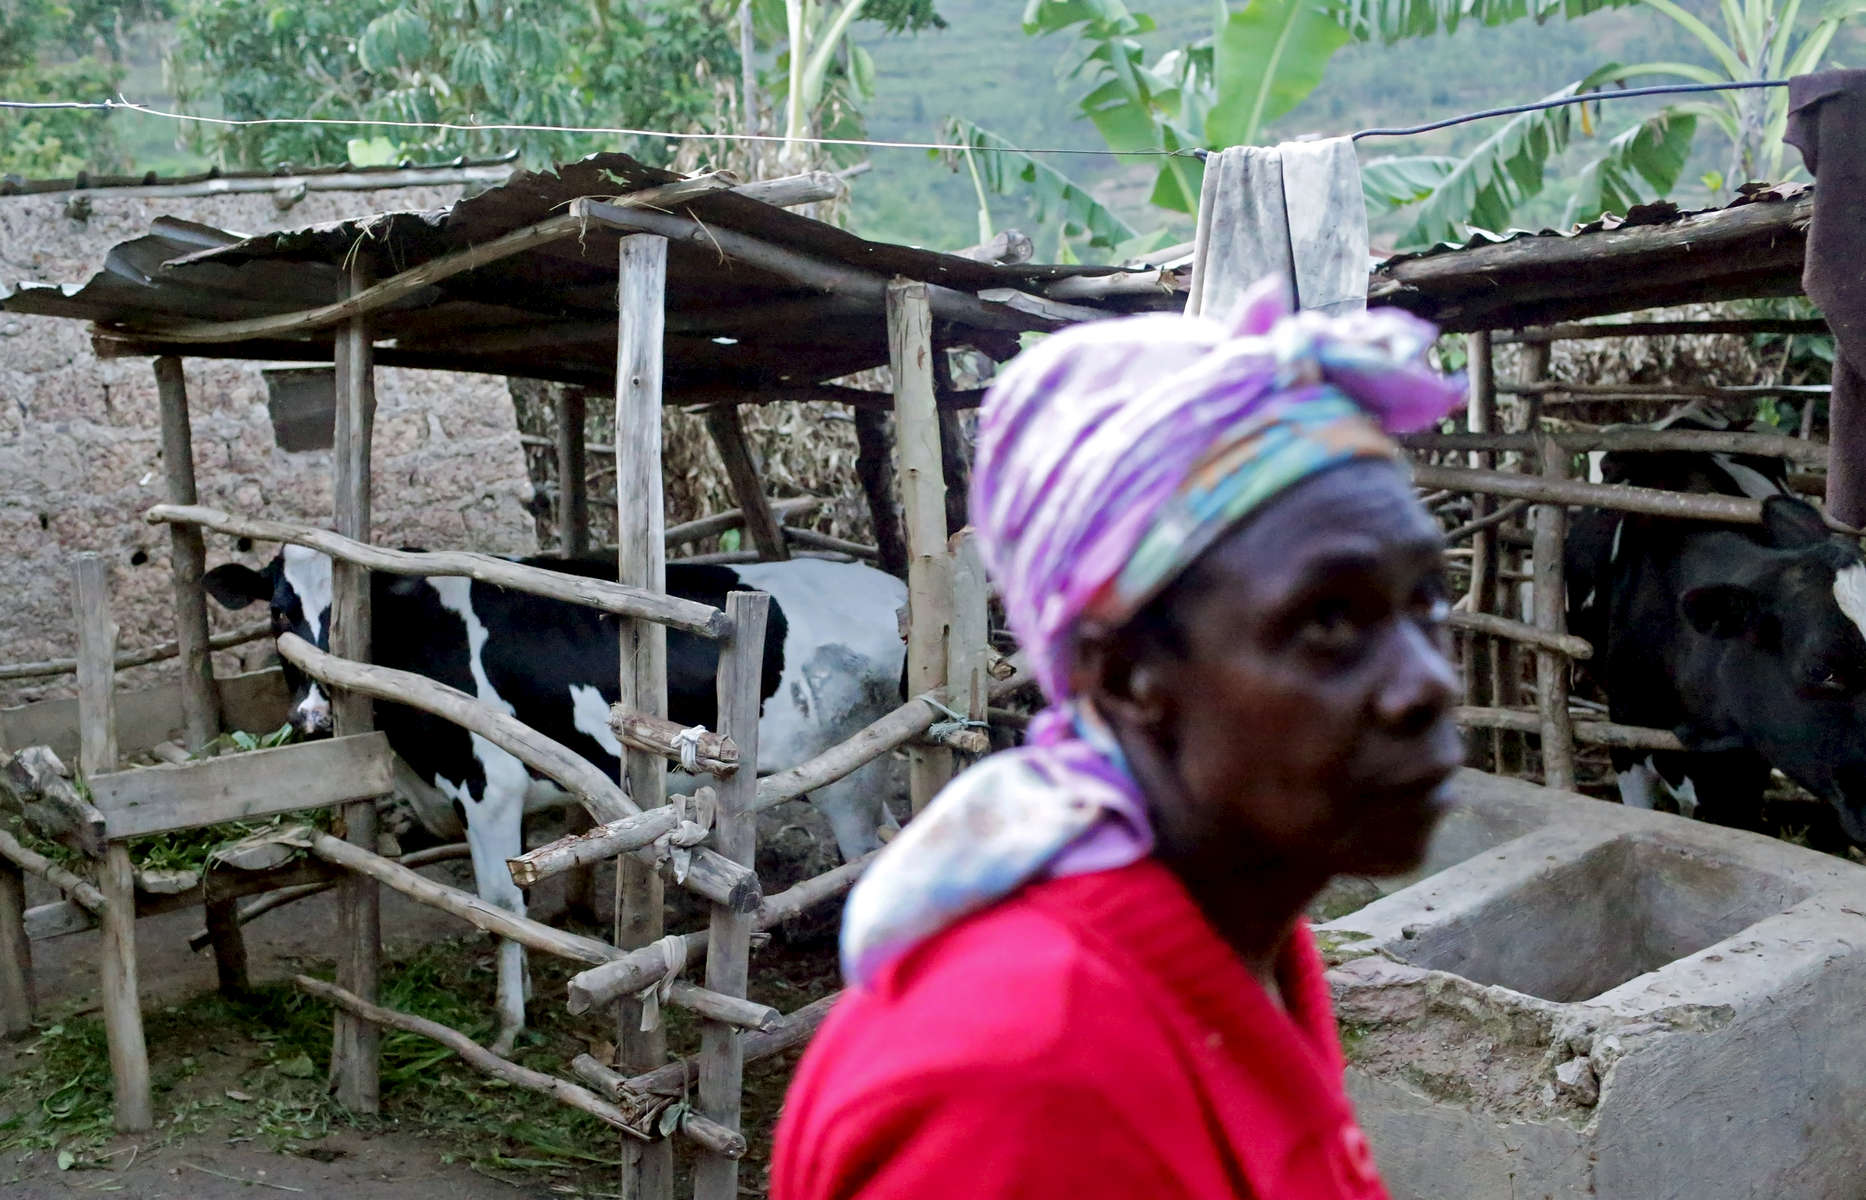 Mwiseneza Winfrid, 62, traverses her yard, where she raises cows, pigs and goats, on November 15, 2017 in the Rulindo District, Rwanda. Winfrid has been a recipient of a biogas digester by a government-financed private company, and says she wishes everybody had access to biogas - not only to drastically reduce cooking time that is otherwise much lengthier when using wood, but also to reduce damage to the environment. She uses the poo discarded from the digester as soil fertilizer. Nearly half of all Rwandans live in poverty, relying on small-scale farming for survival without gas or electricity. With so many women and children spending hours of the day foraging for wood used for cooking and light, often damaging their eyes, lungs, the forests and atmosphere, a little inventiveness helps. Enter cow and enter pig -- not just as a source of food, but also the heat needed to cook it. Or more specifically, their poo -- the fuel fed to a biogas digester, a tank that converts organic waste into methane. 